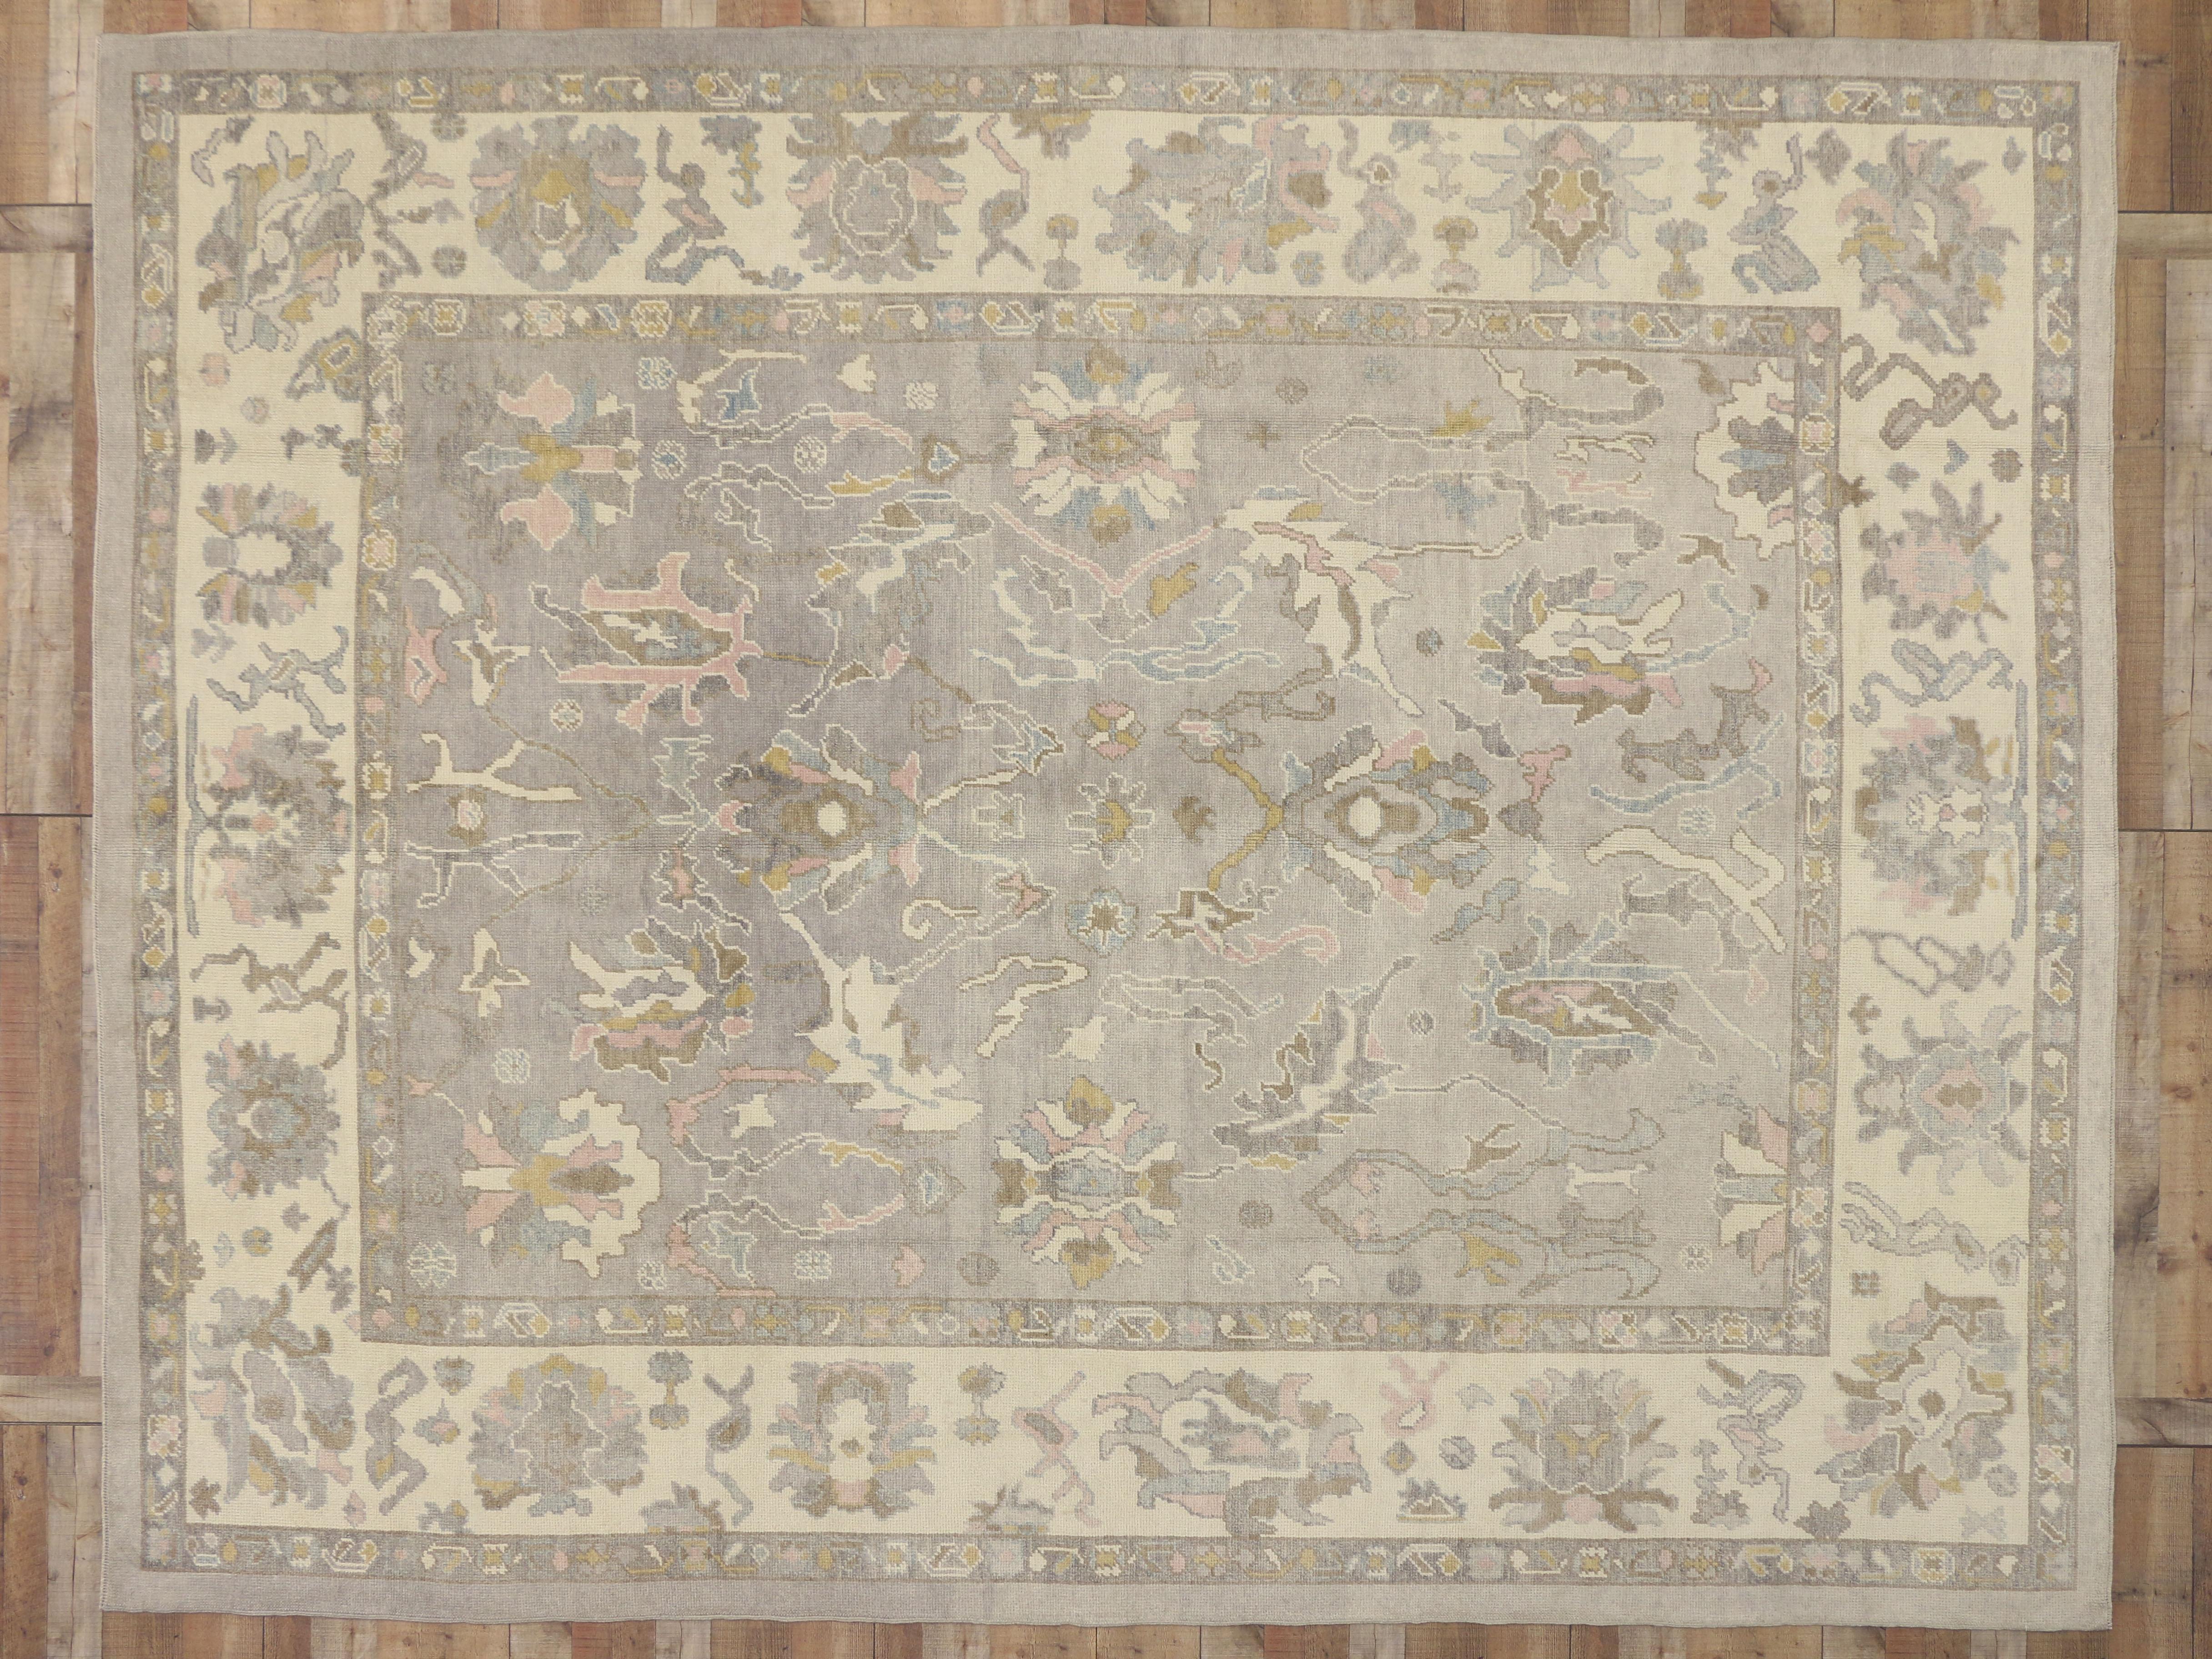 Hand-Knotted Rustic Farmhouse New Turkish Oushak Area Rug with Light, Neutral Colors